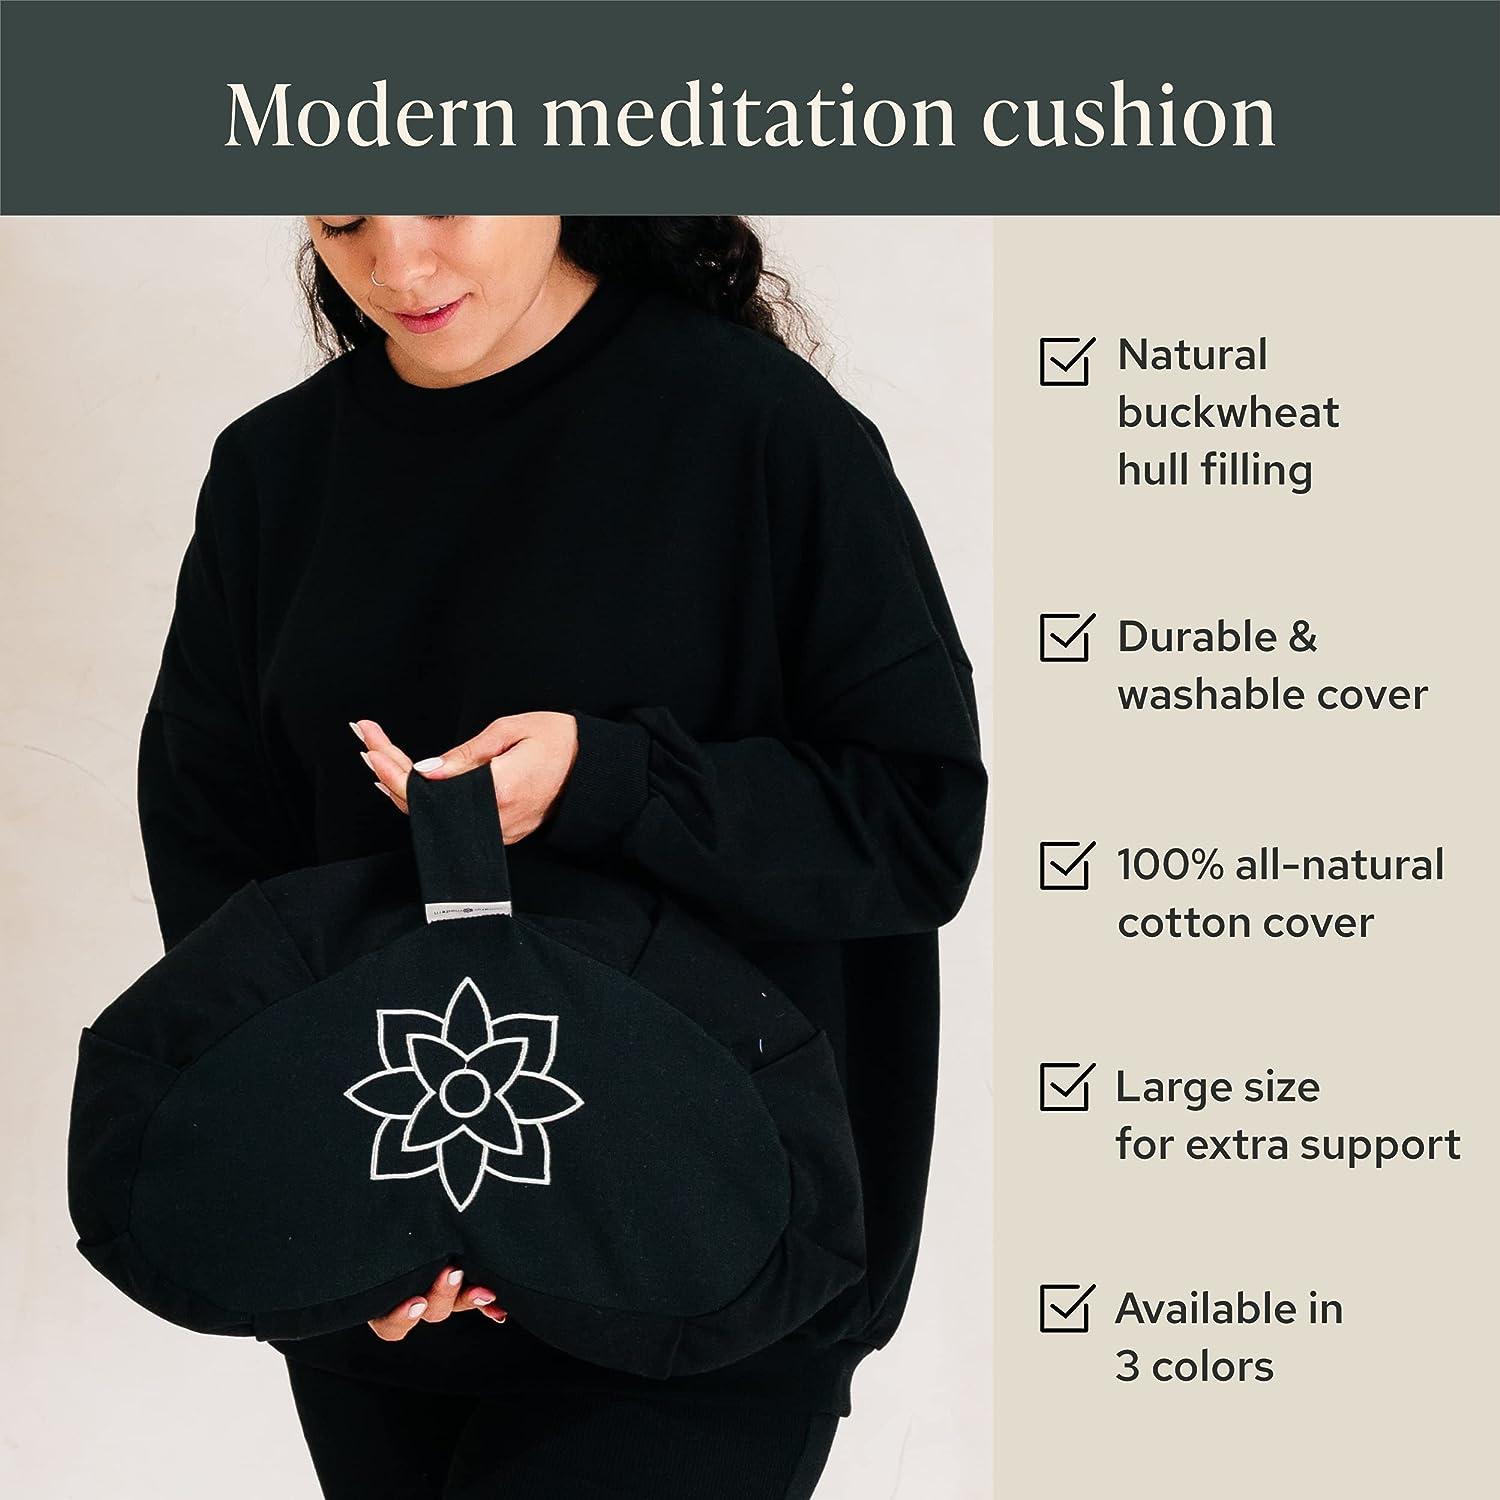 Mindful & Modern Large Meditation Cushion for Zafu Yoga - Meditation Pillow  for Sitting on The Floor - Buckwheat Hull Filled Yoga Cushion with  Removable, Washable 100% Cotton Cover and Carry Handle Slate Grey